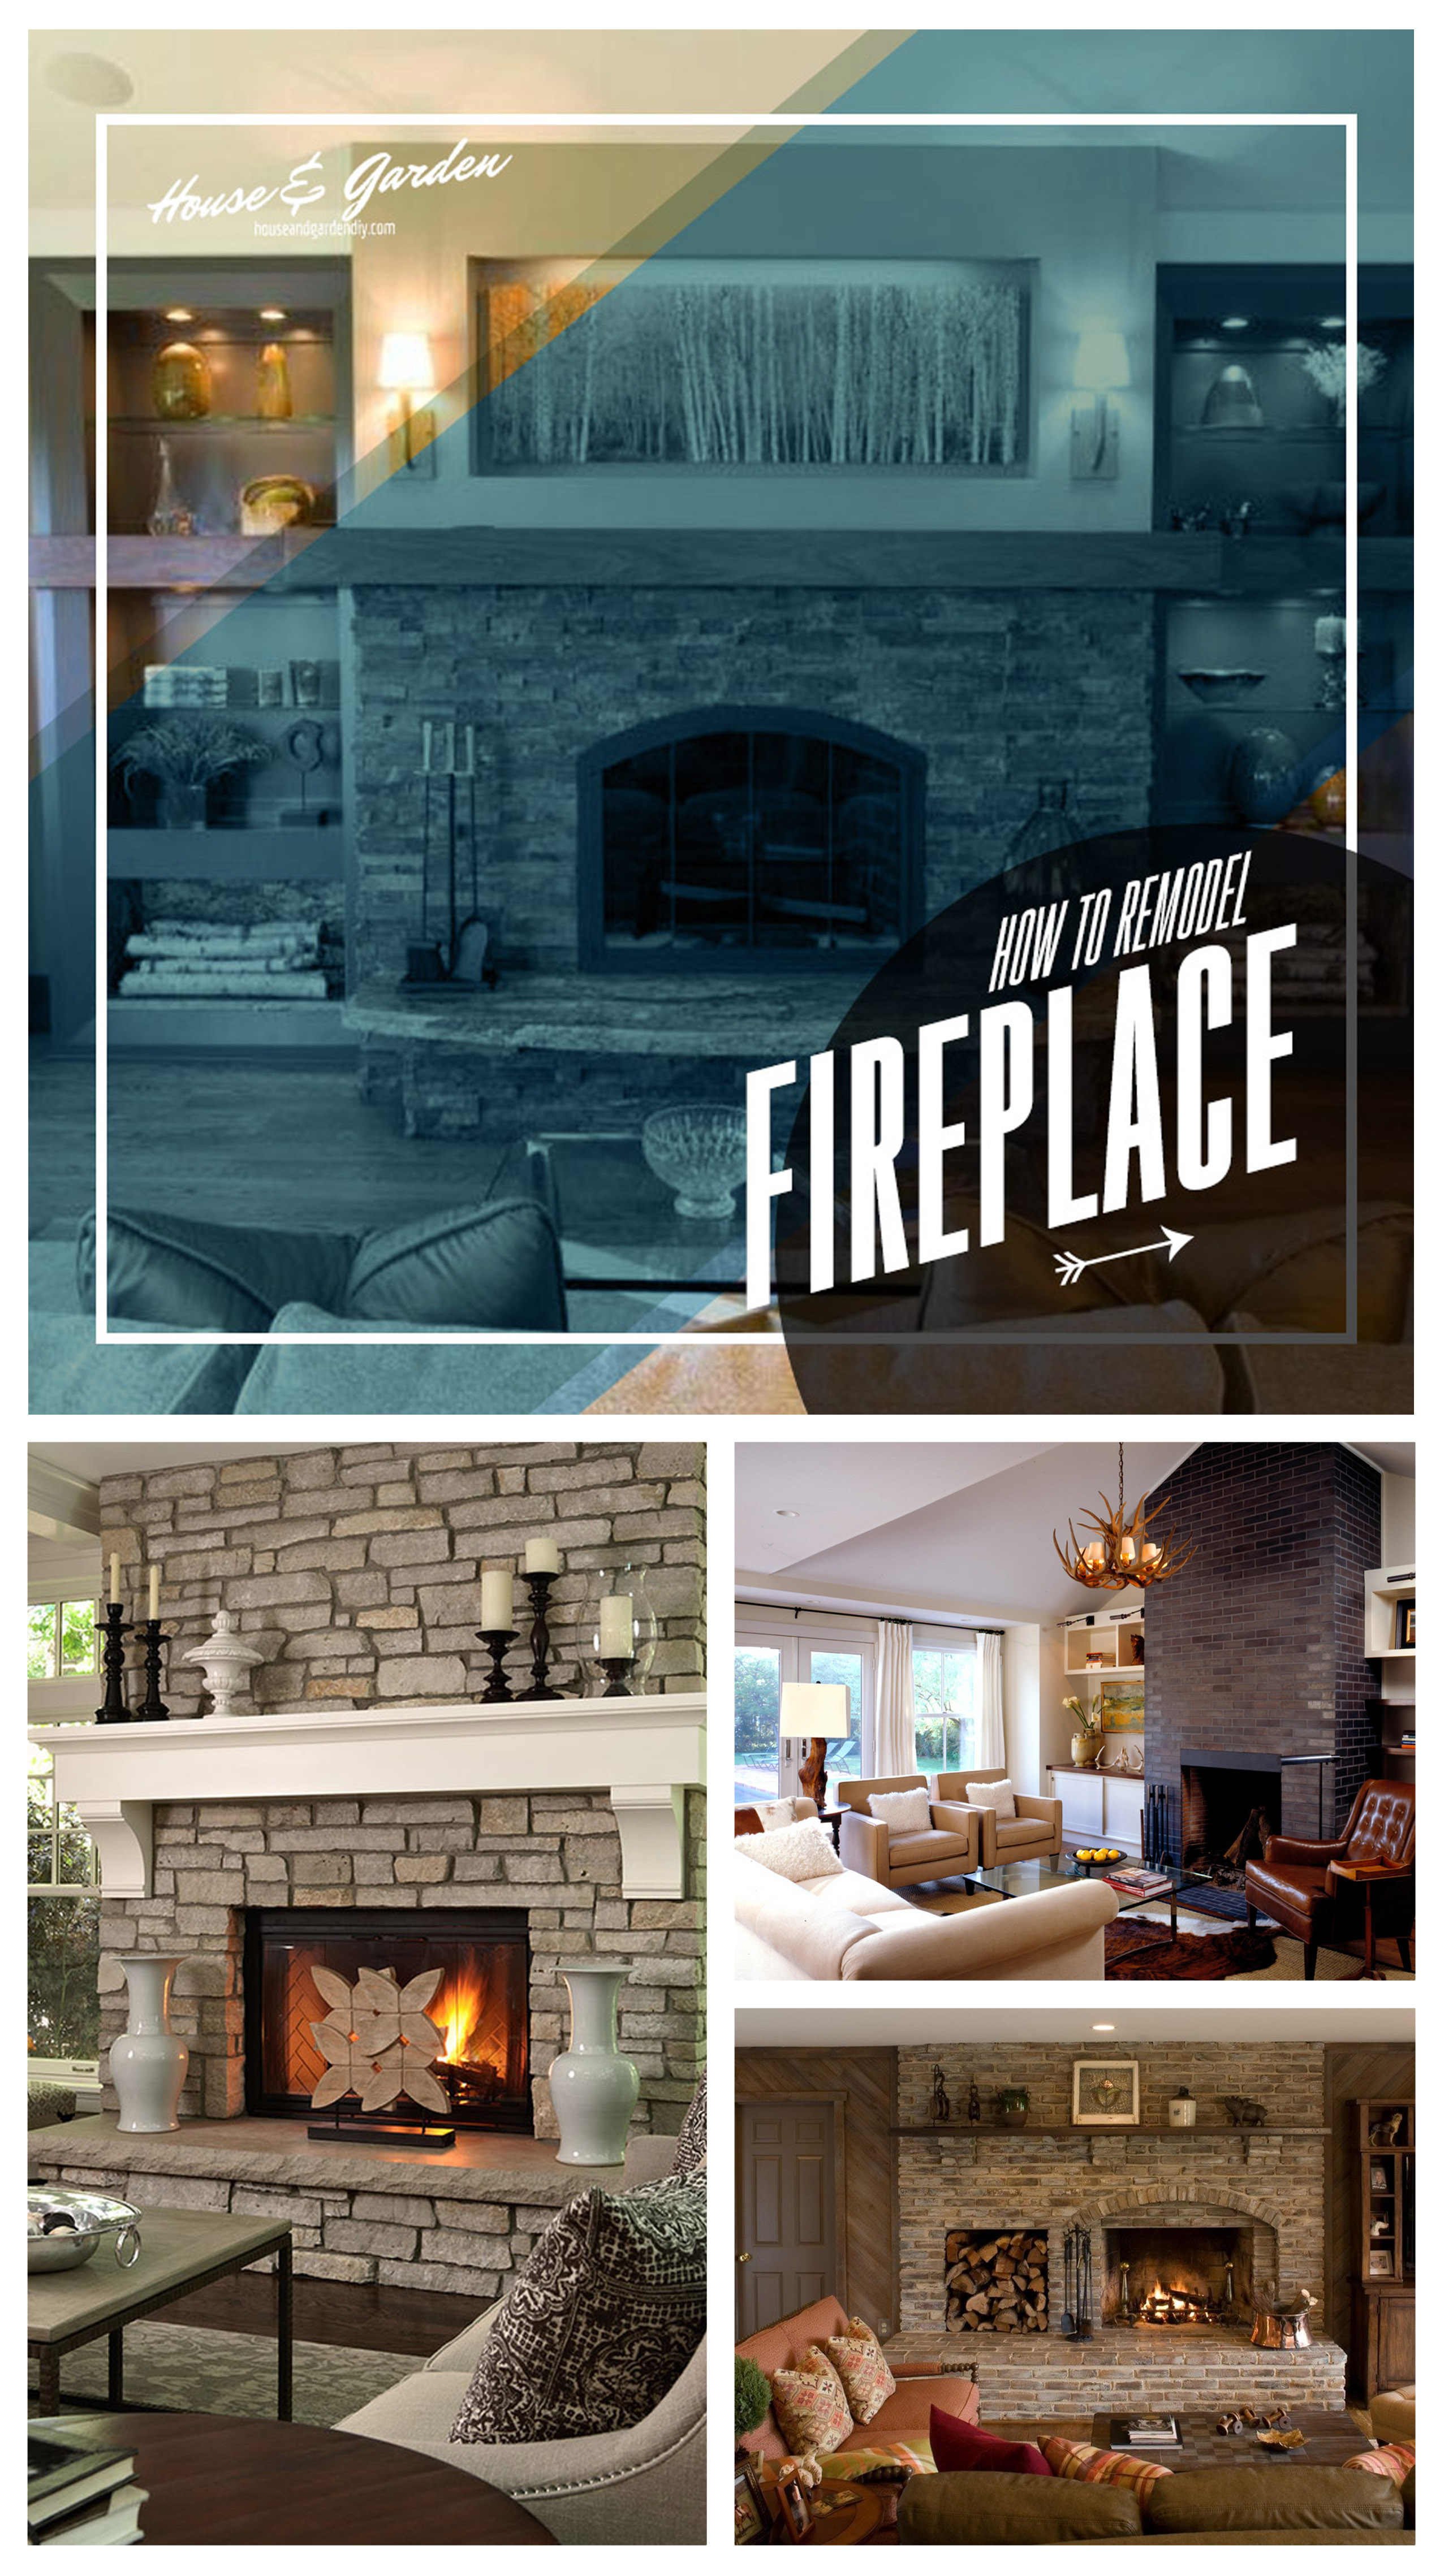 How to Remodel Your Fireplace - Tips to Remodel